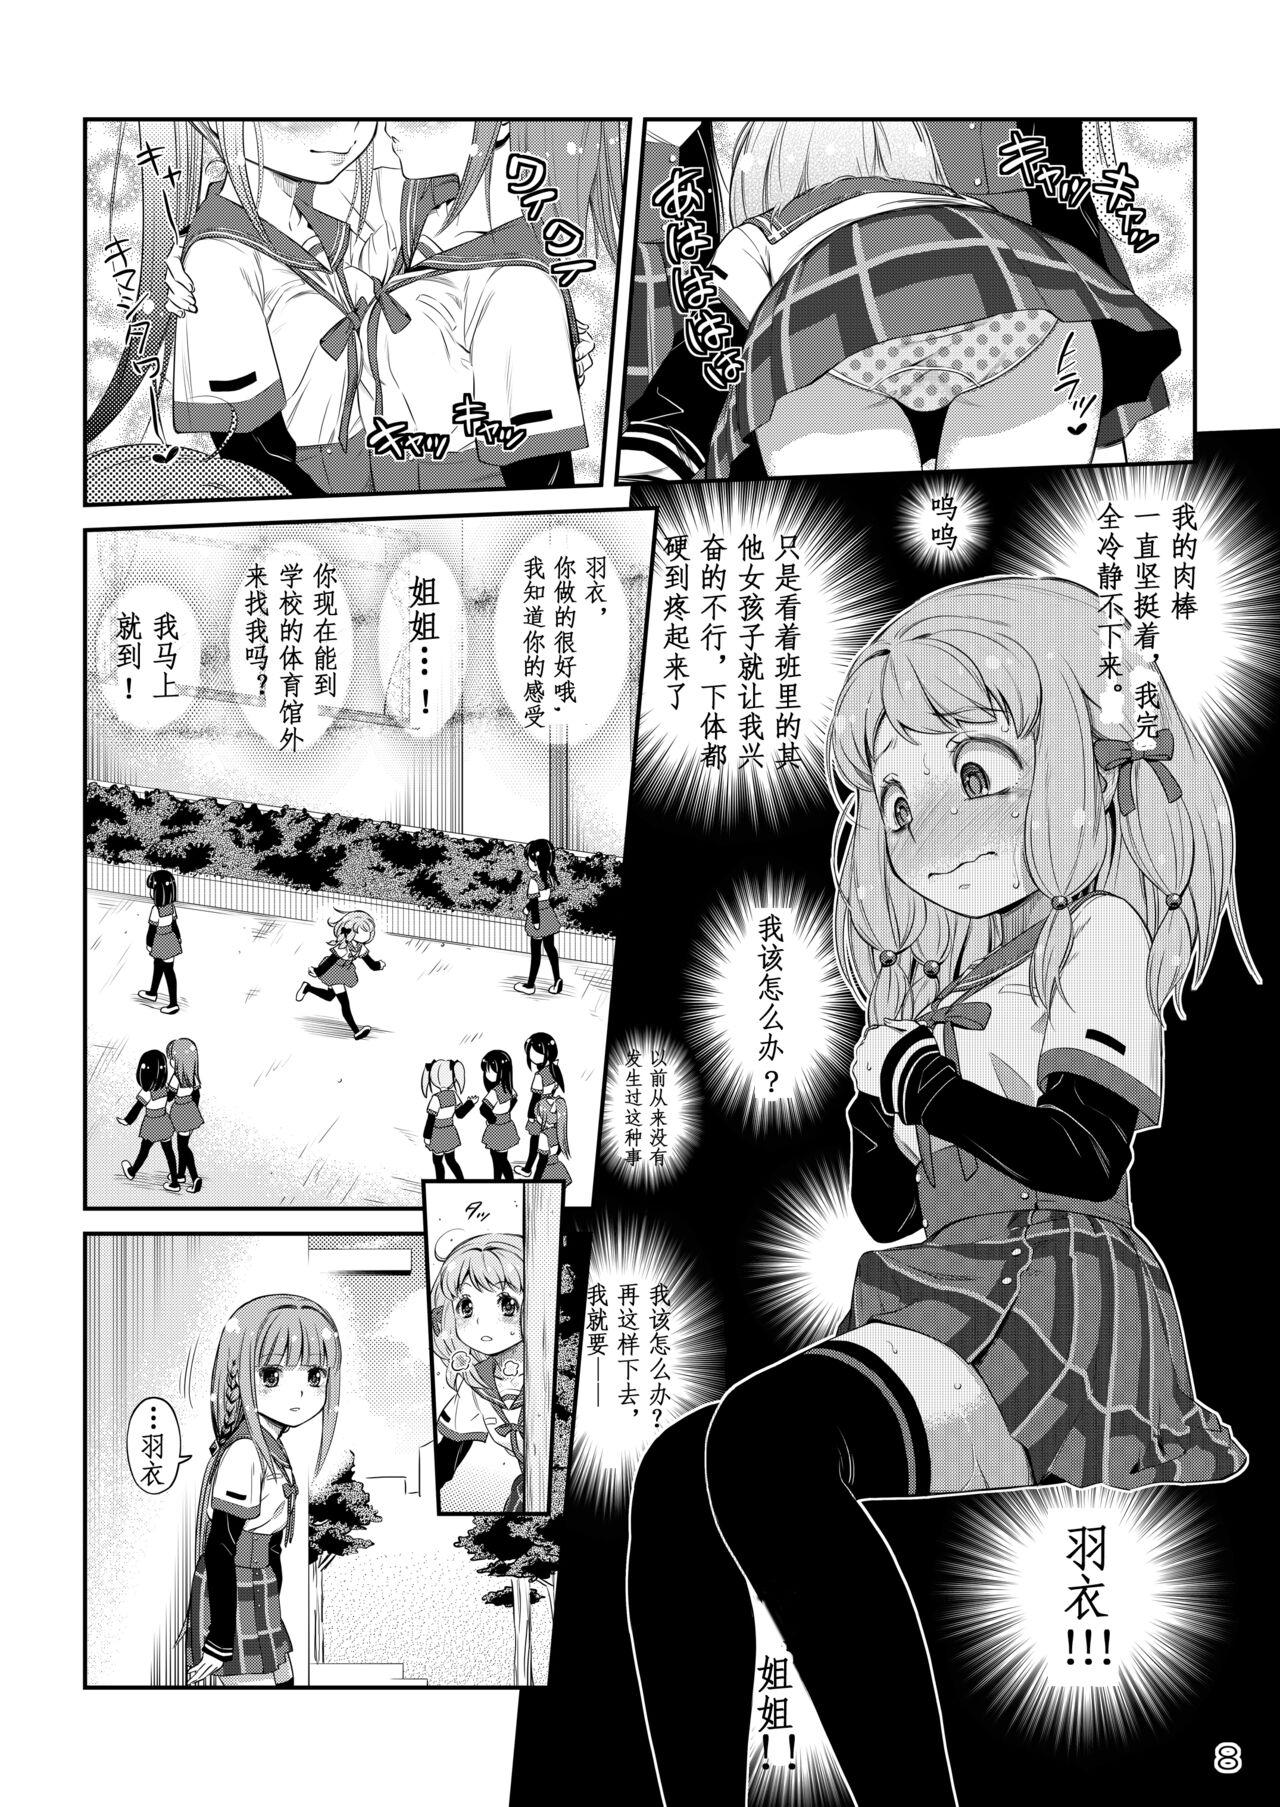 Trimmed Dear My Little Sister - Puella magi madoka magica side story magia record Style - Page 8